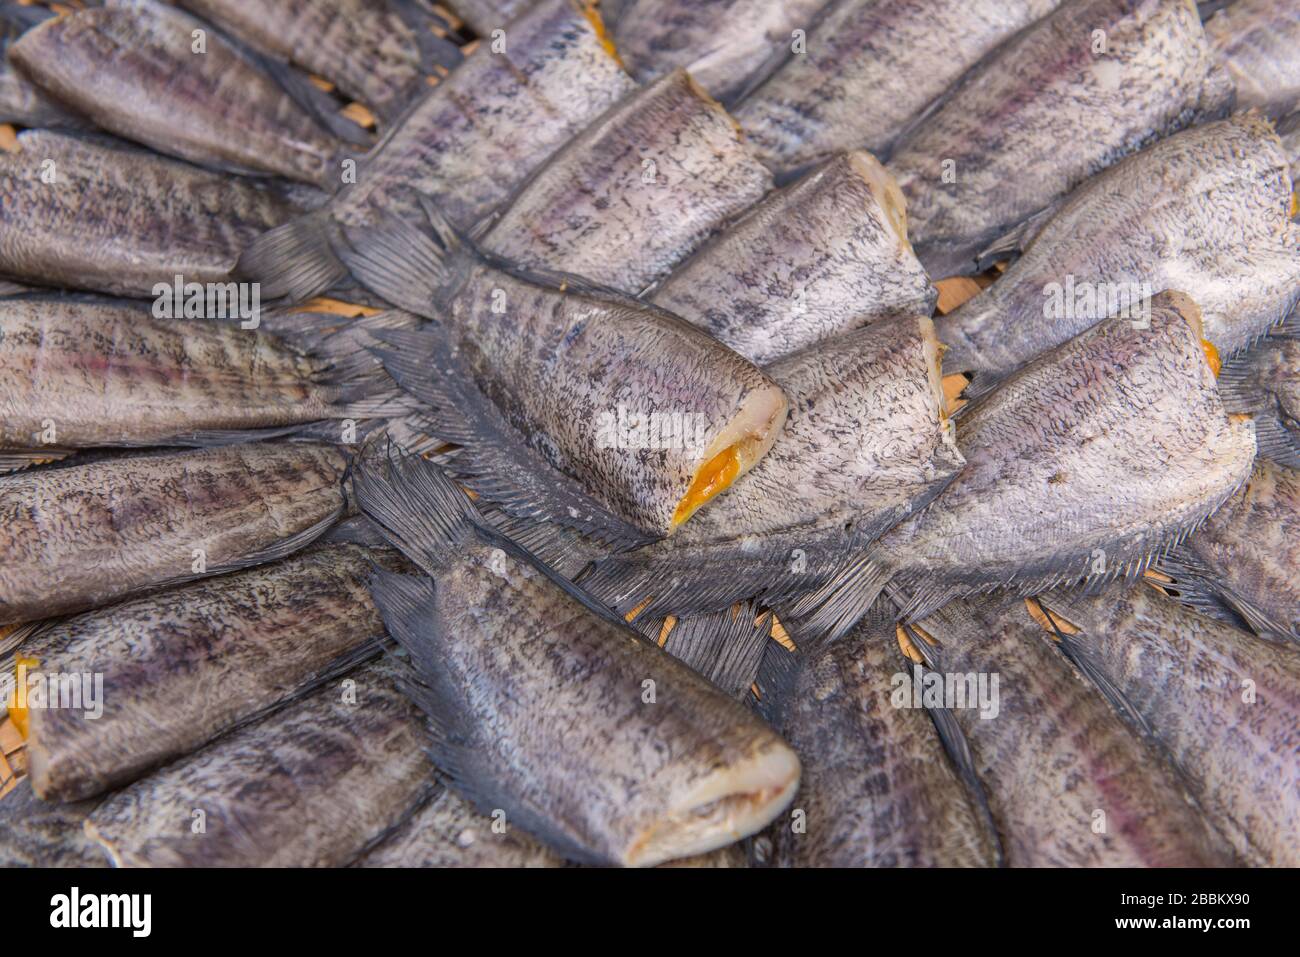 Trichogaster pectoralis, Dry fish out salty for cooking Stock Photo